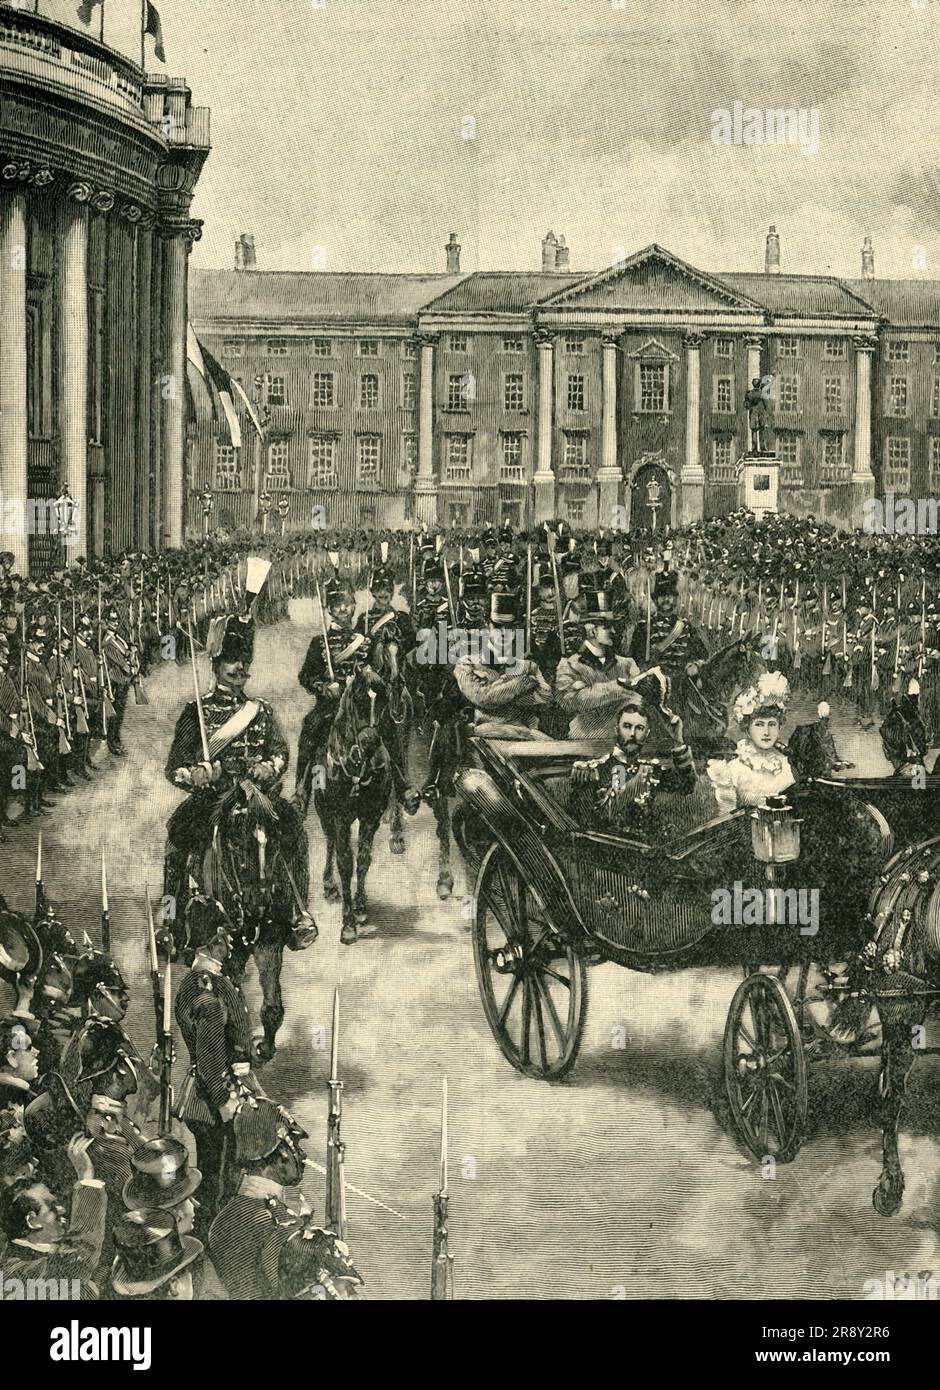 'The Visit of the Duke and Duchess of York to Dublin', 1897, (c1900). The future King George V and his wife Mary of Teck on a royal visit to Ireland, '...touring the distressful country for three weeks. The Royal visitors were welcomed at Dublin with an enthusiasm that swept aside all sombre prognostications and increased with each day of their sojourn in the Emerald Isle...The tour was a brilliant success from a social, and a happy experiment from a political point of view, and the 'Times' summed up the result by asserting that &quot;the spirit of loyalty to the Throne was, at least, as stron Stock Photo